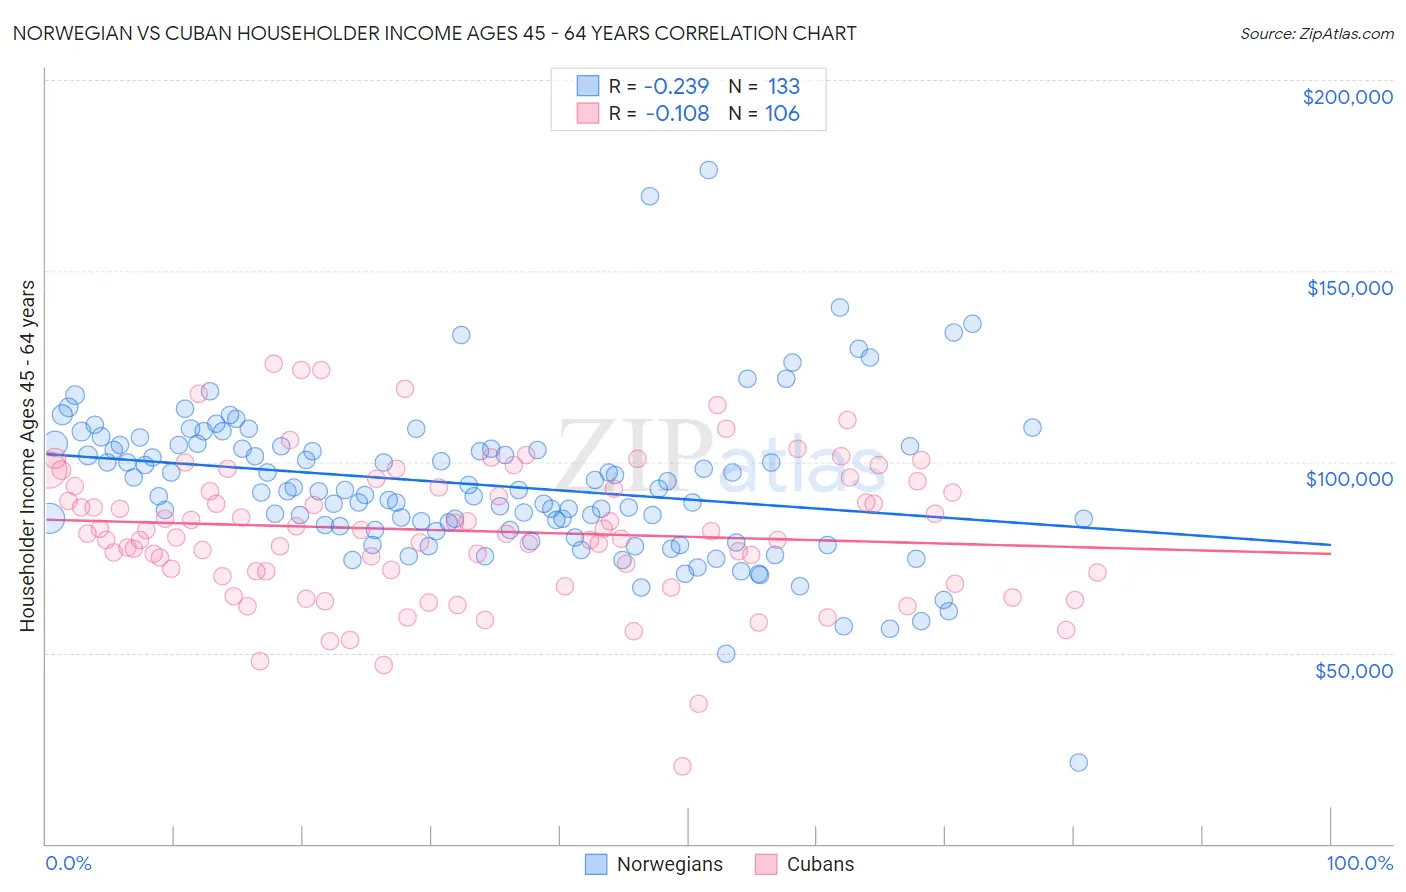 Norwegian vs Cuban Householder Income Ages 45 - 64 years